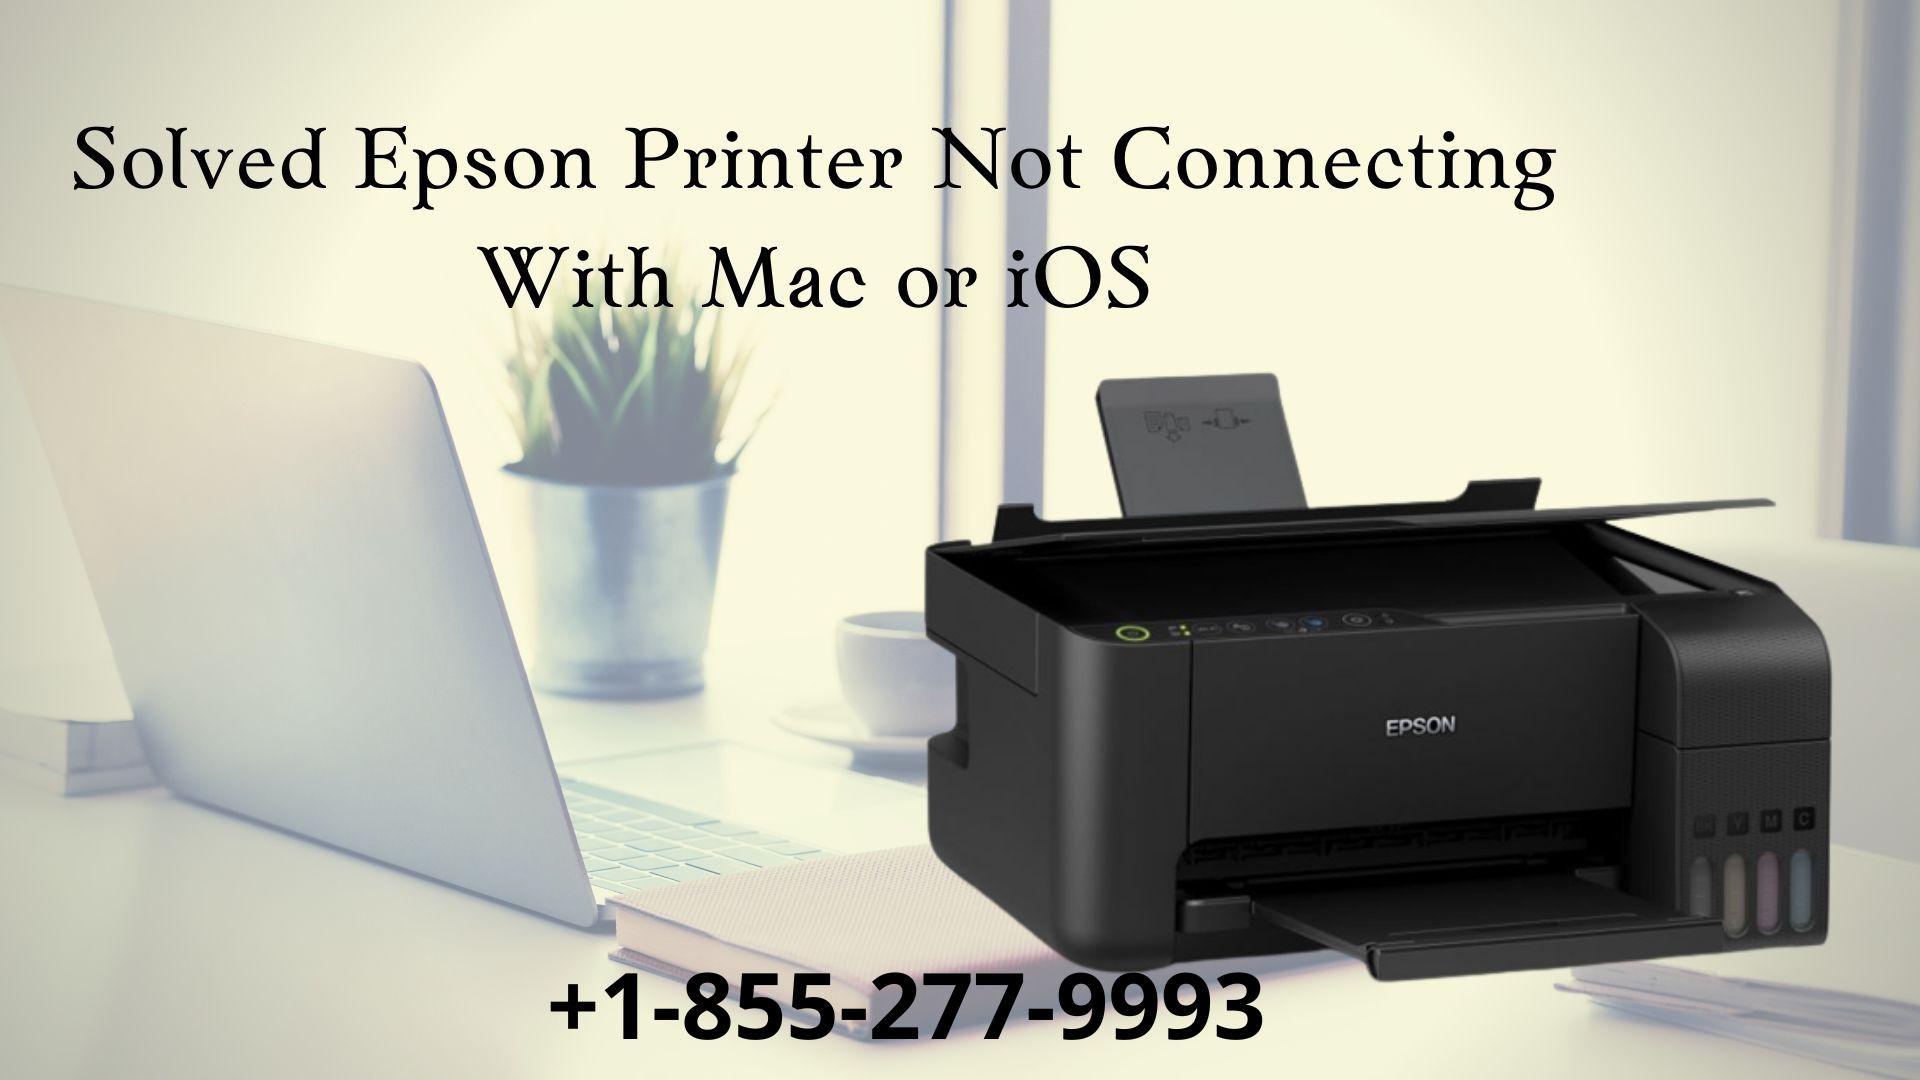 Epson Printer Not Connecting With Mac